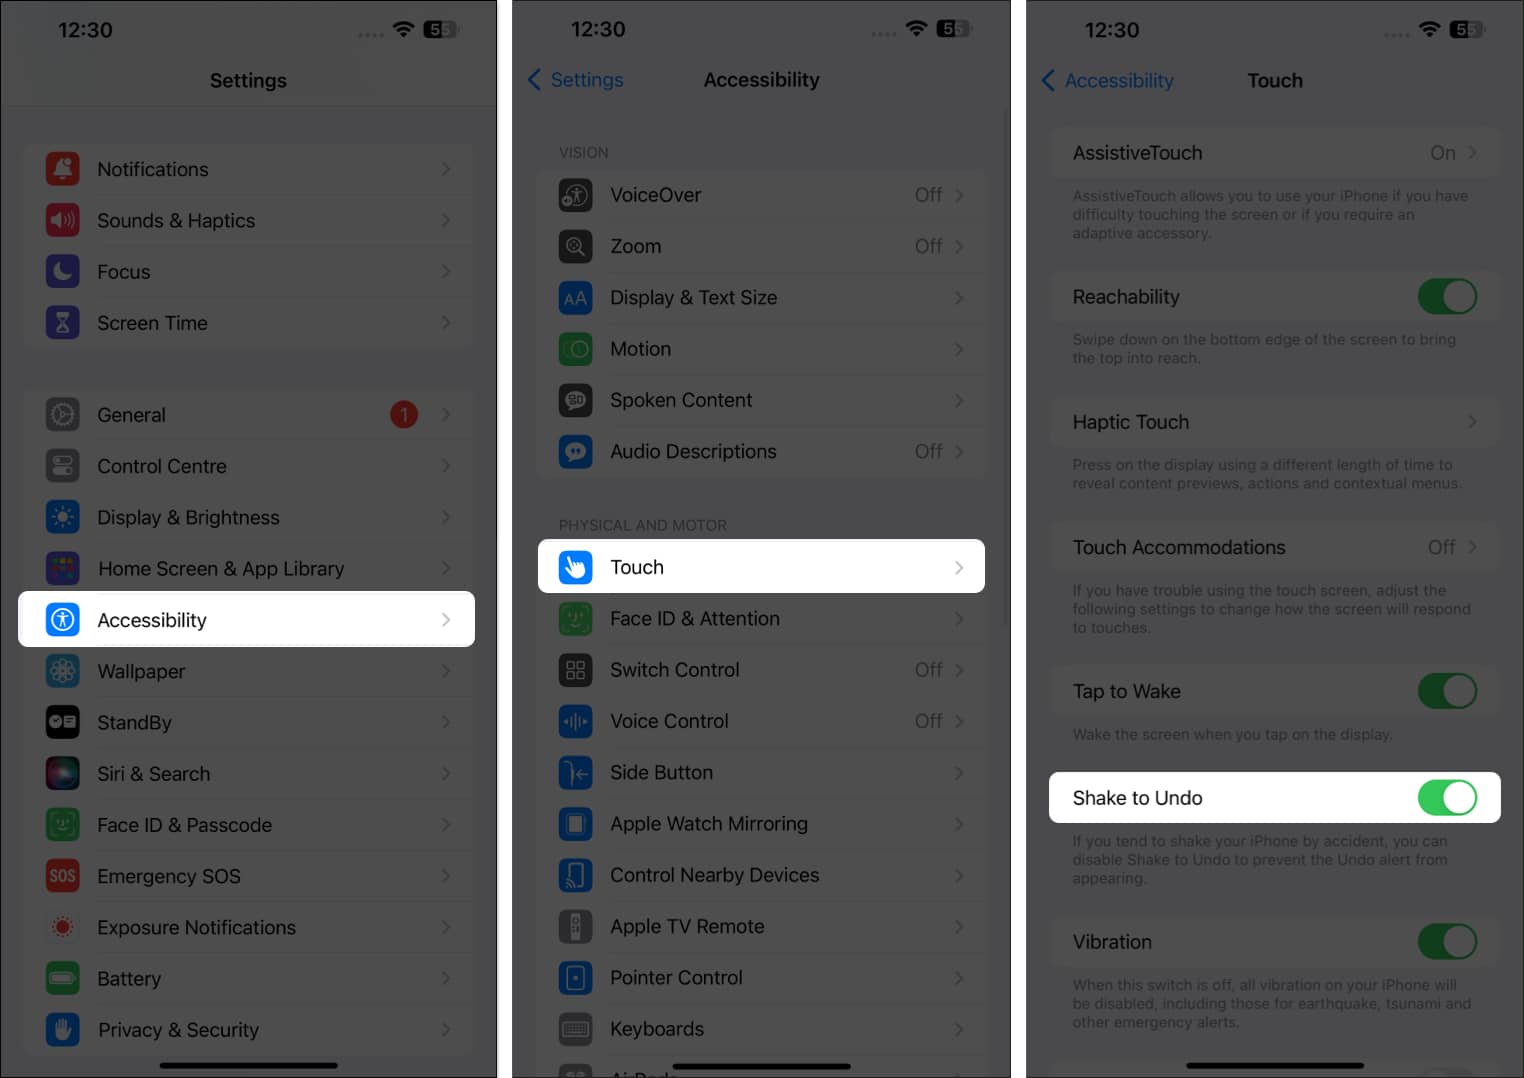 Go to Accessibility, select Touch and toggle on Shake to Undo on your iPhone or iPad